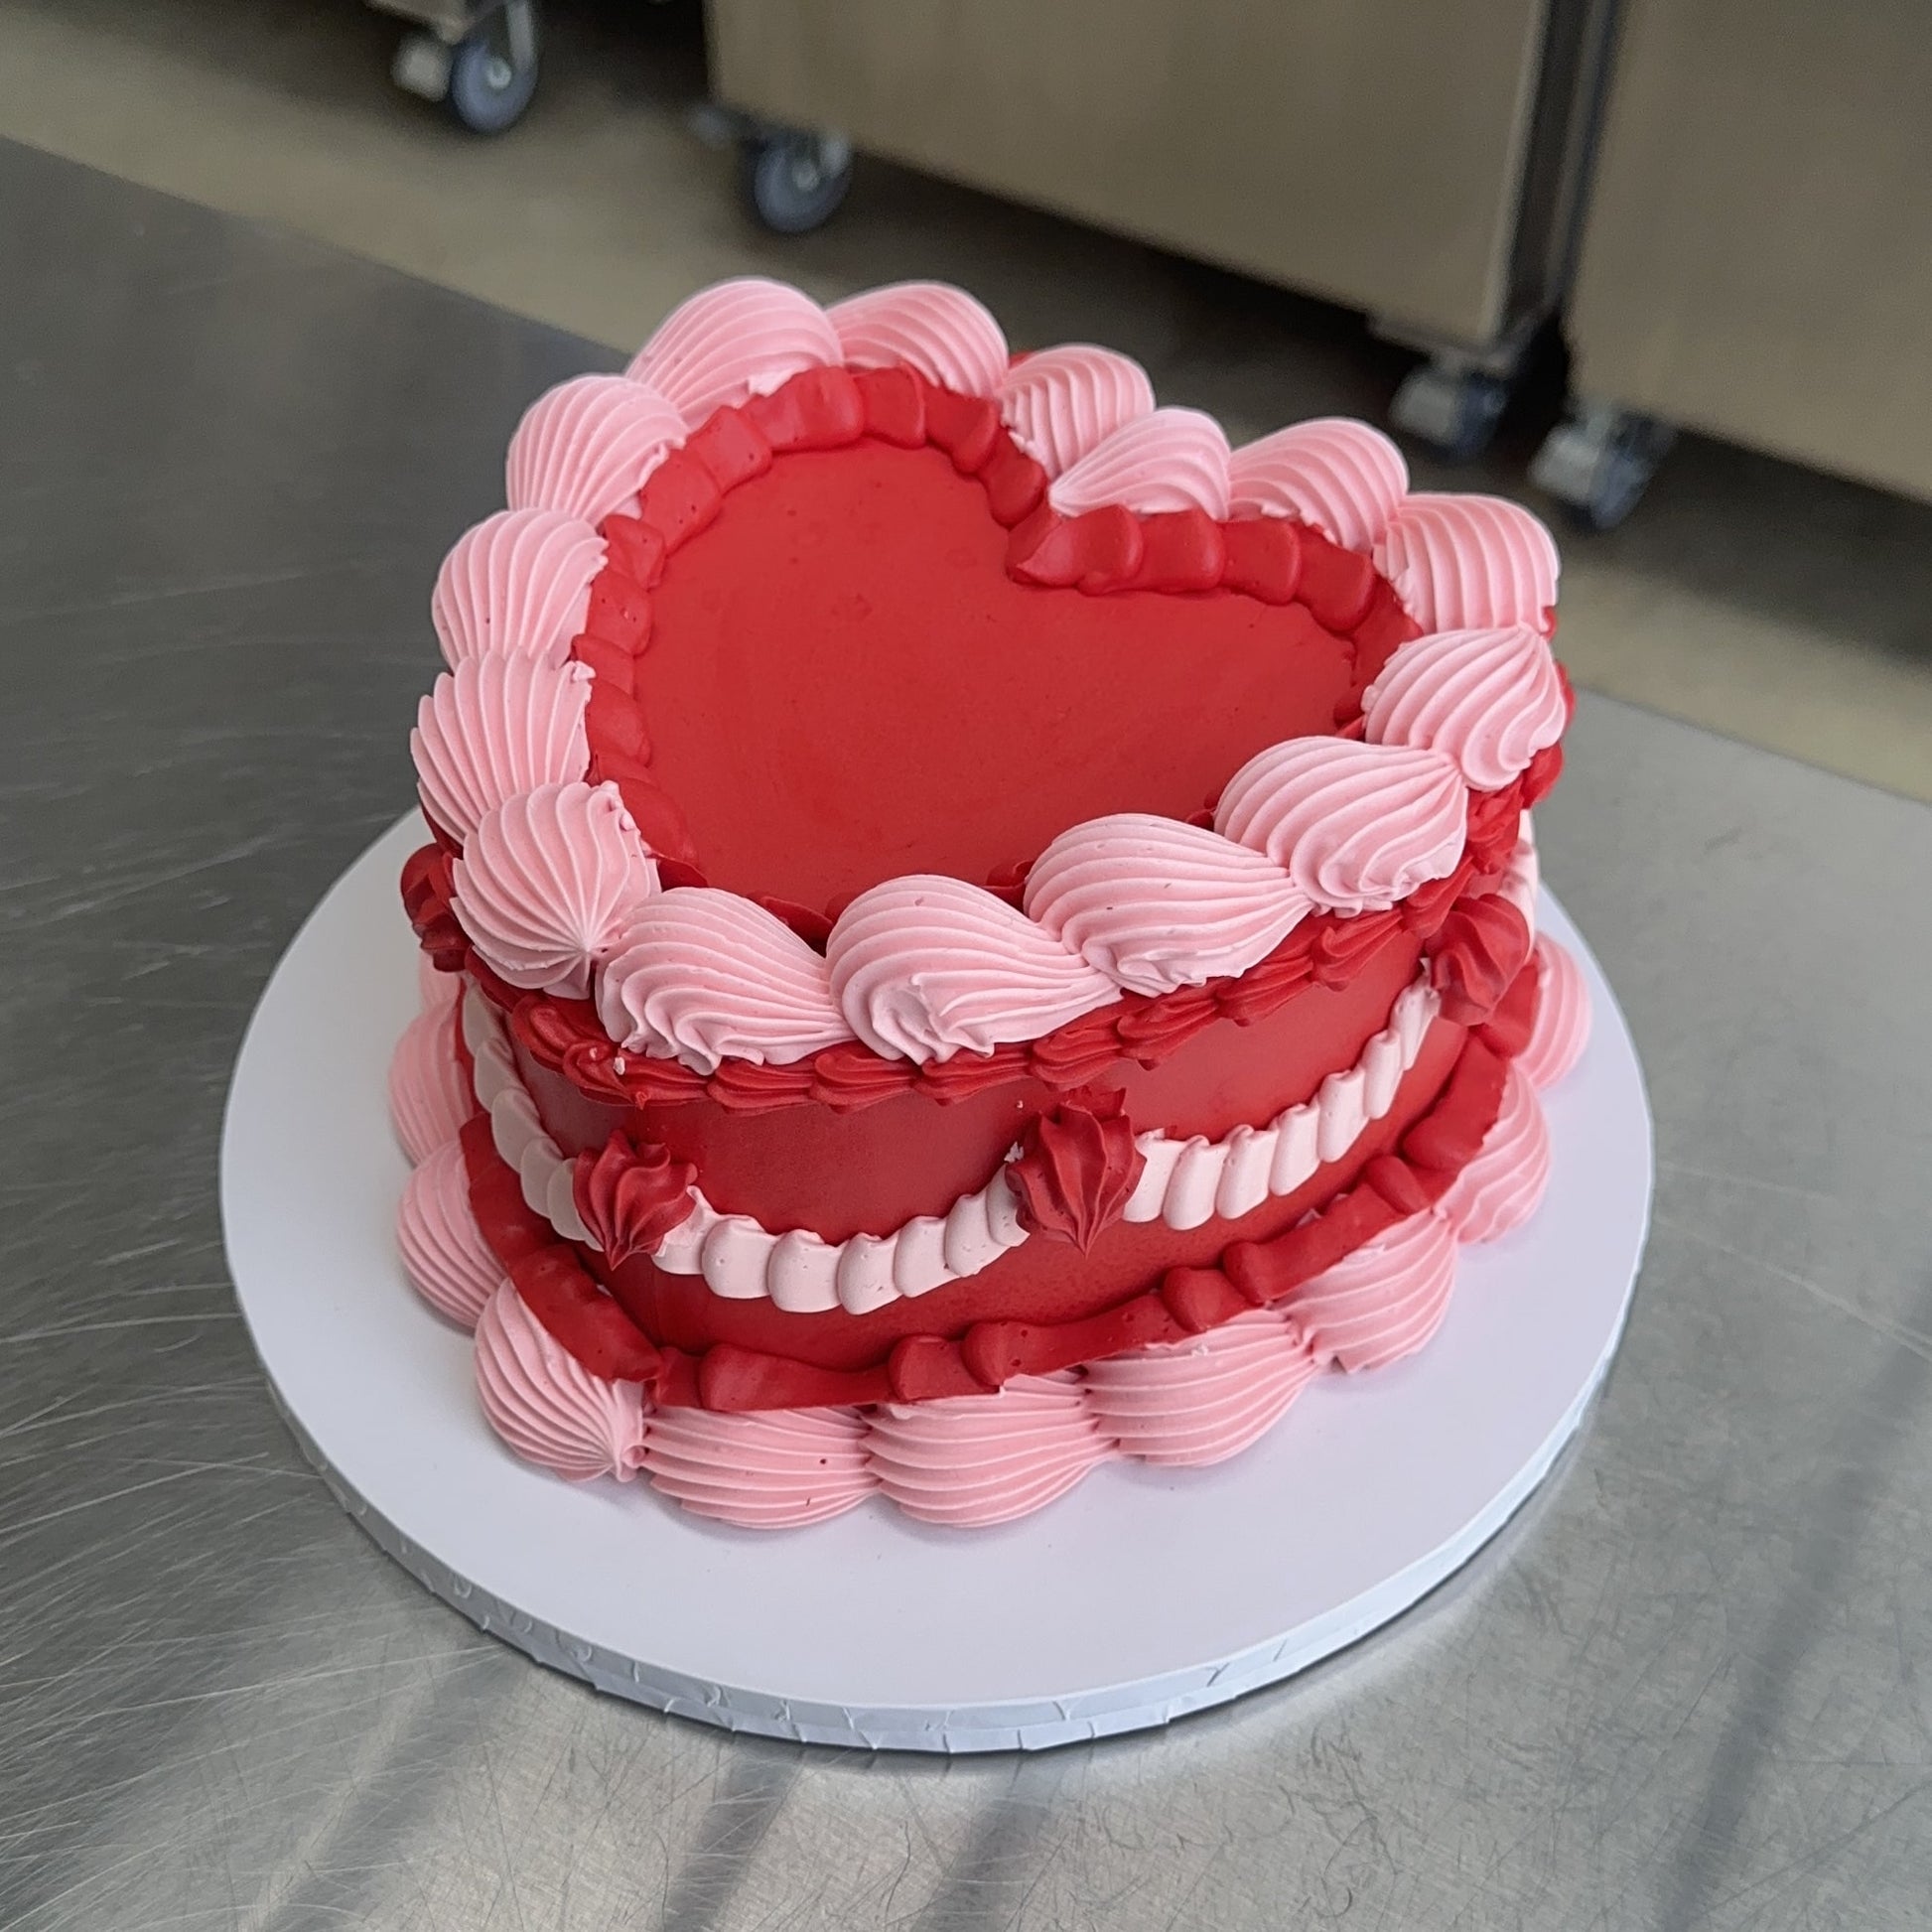 A classically decorated Vintage cake in two tone red and pink buttercream piping.